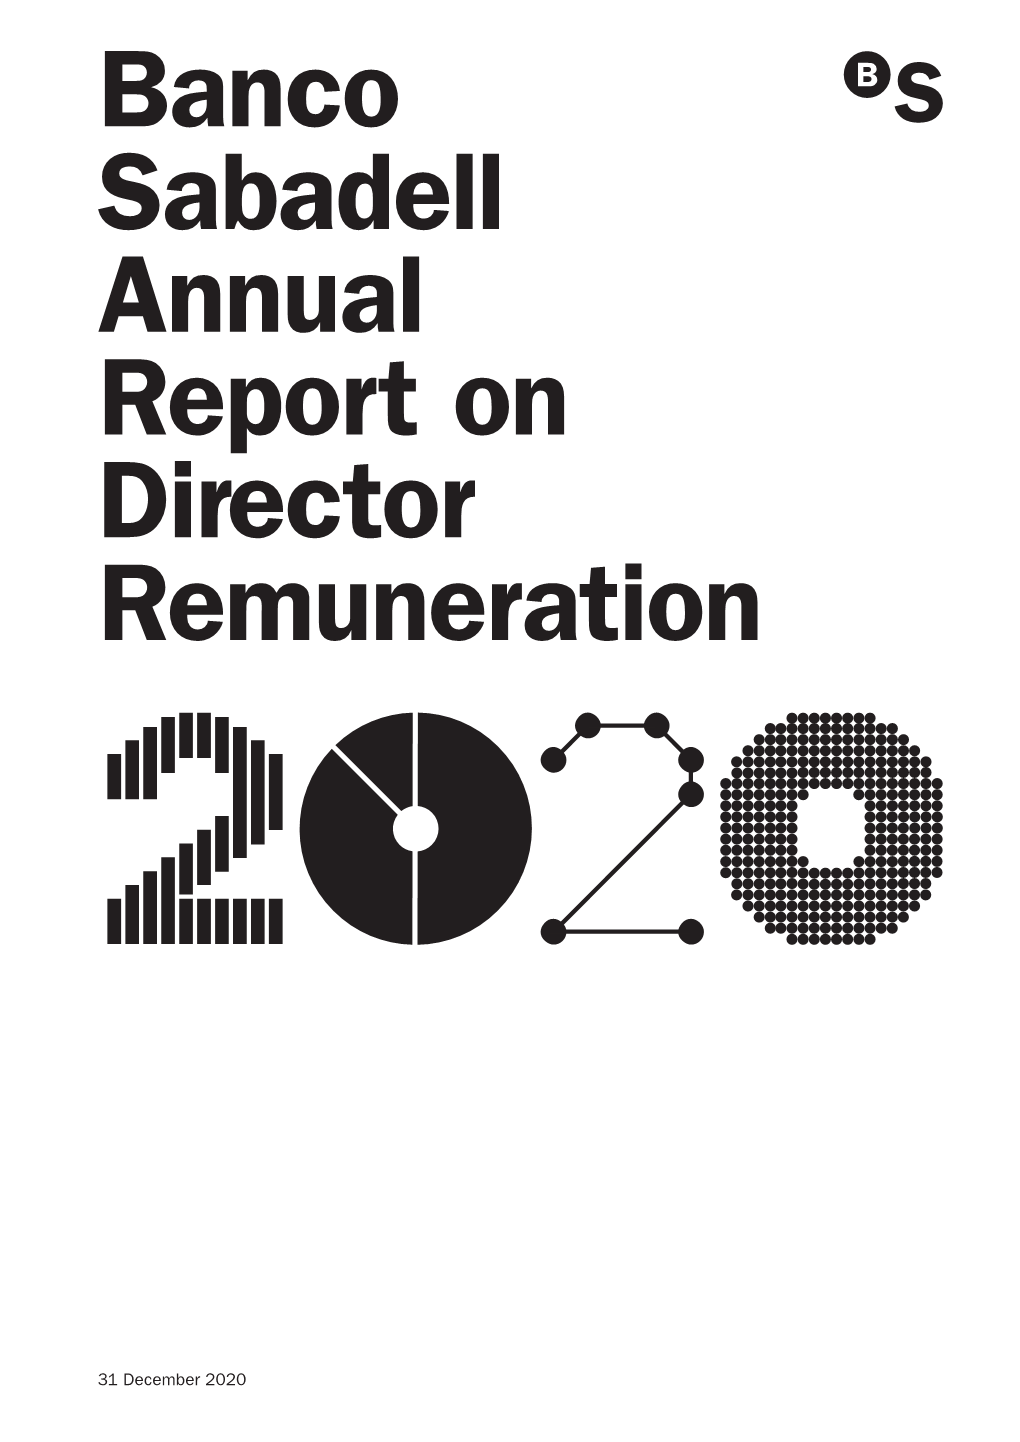 Banco Sabadell Annual Report on Director Remuneration